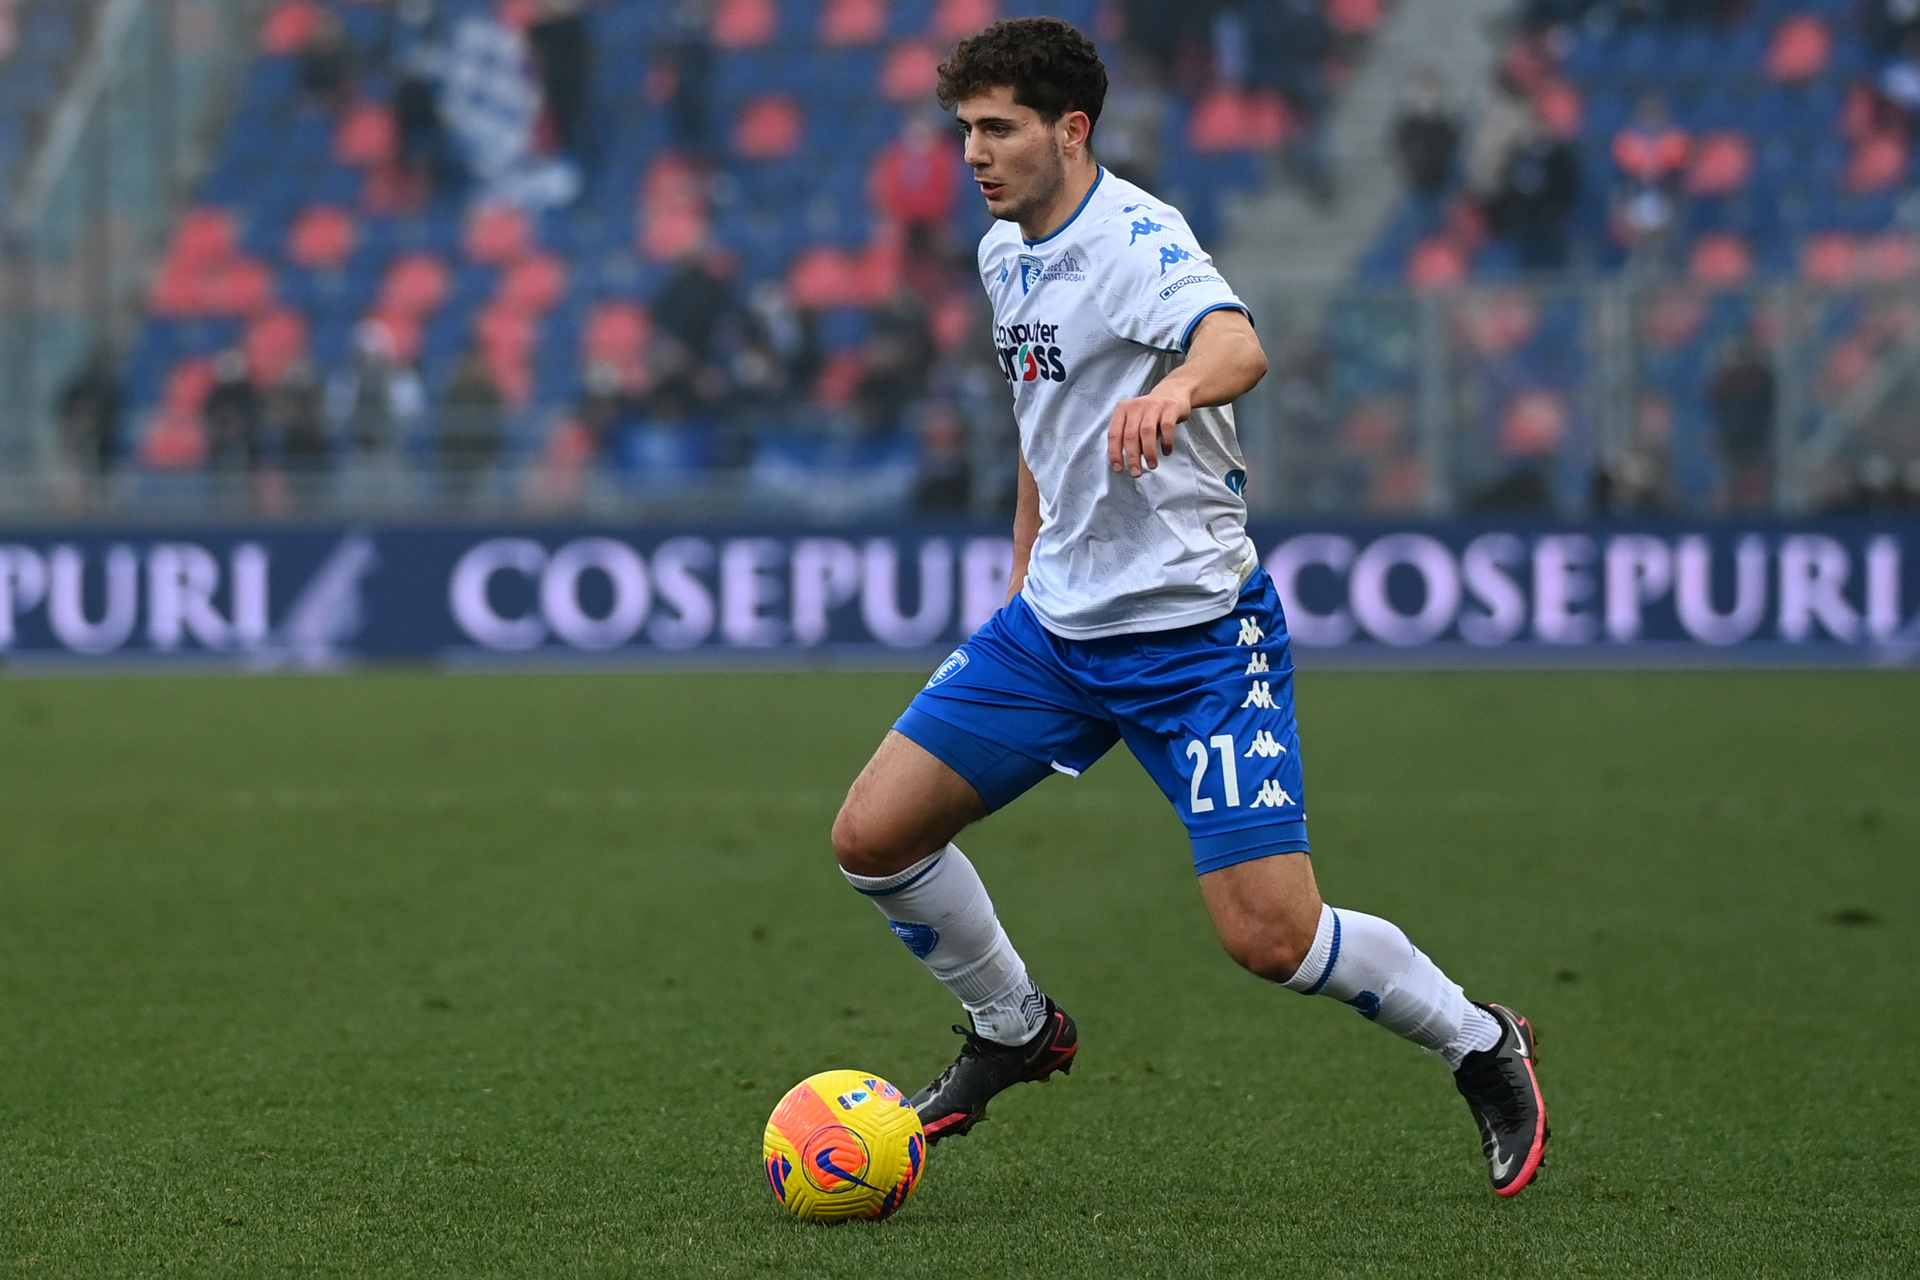 It happened so quickly': Kiwi football Liberato Cacace star reflects on Serie A rise - NZ Herald